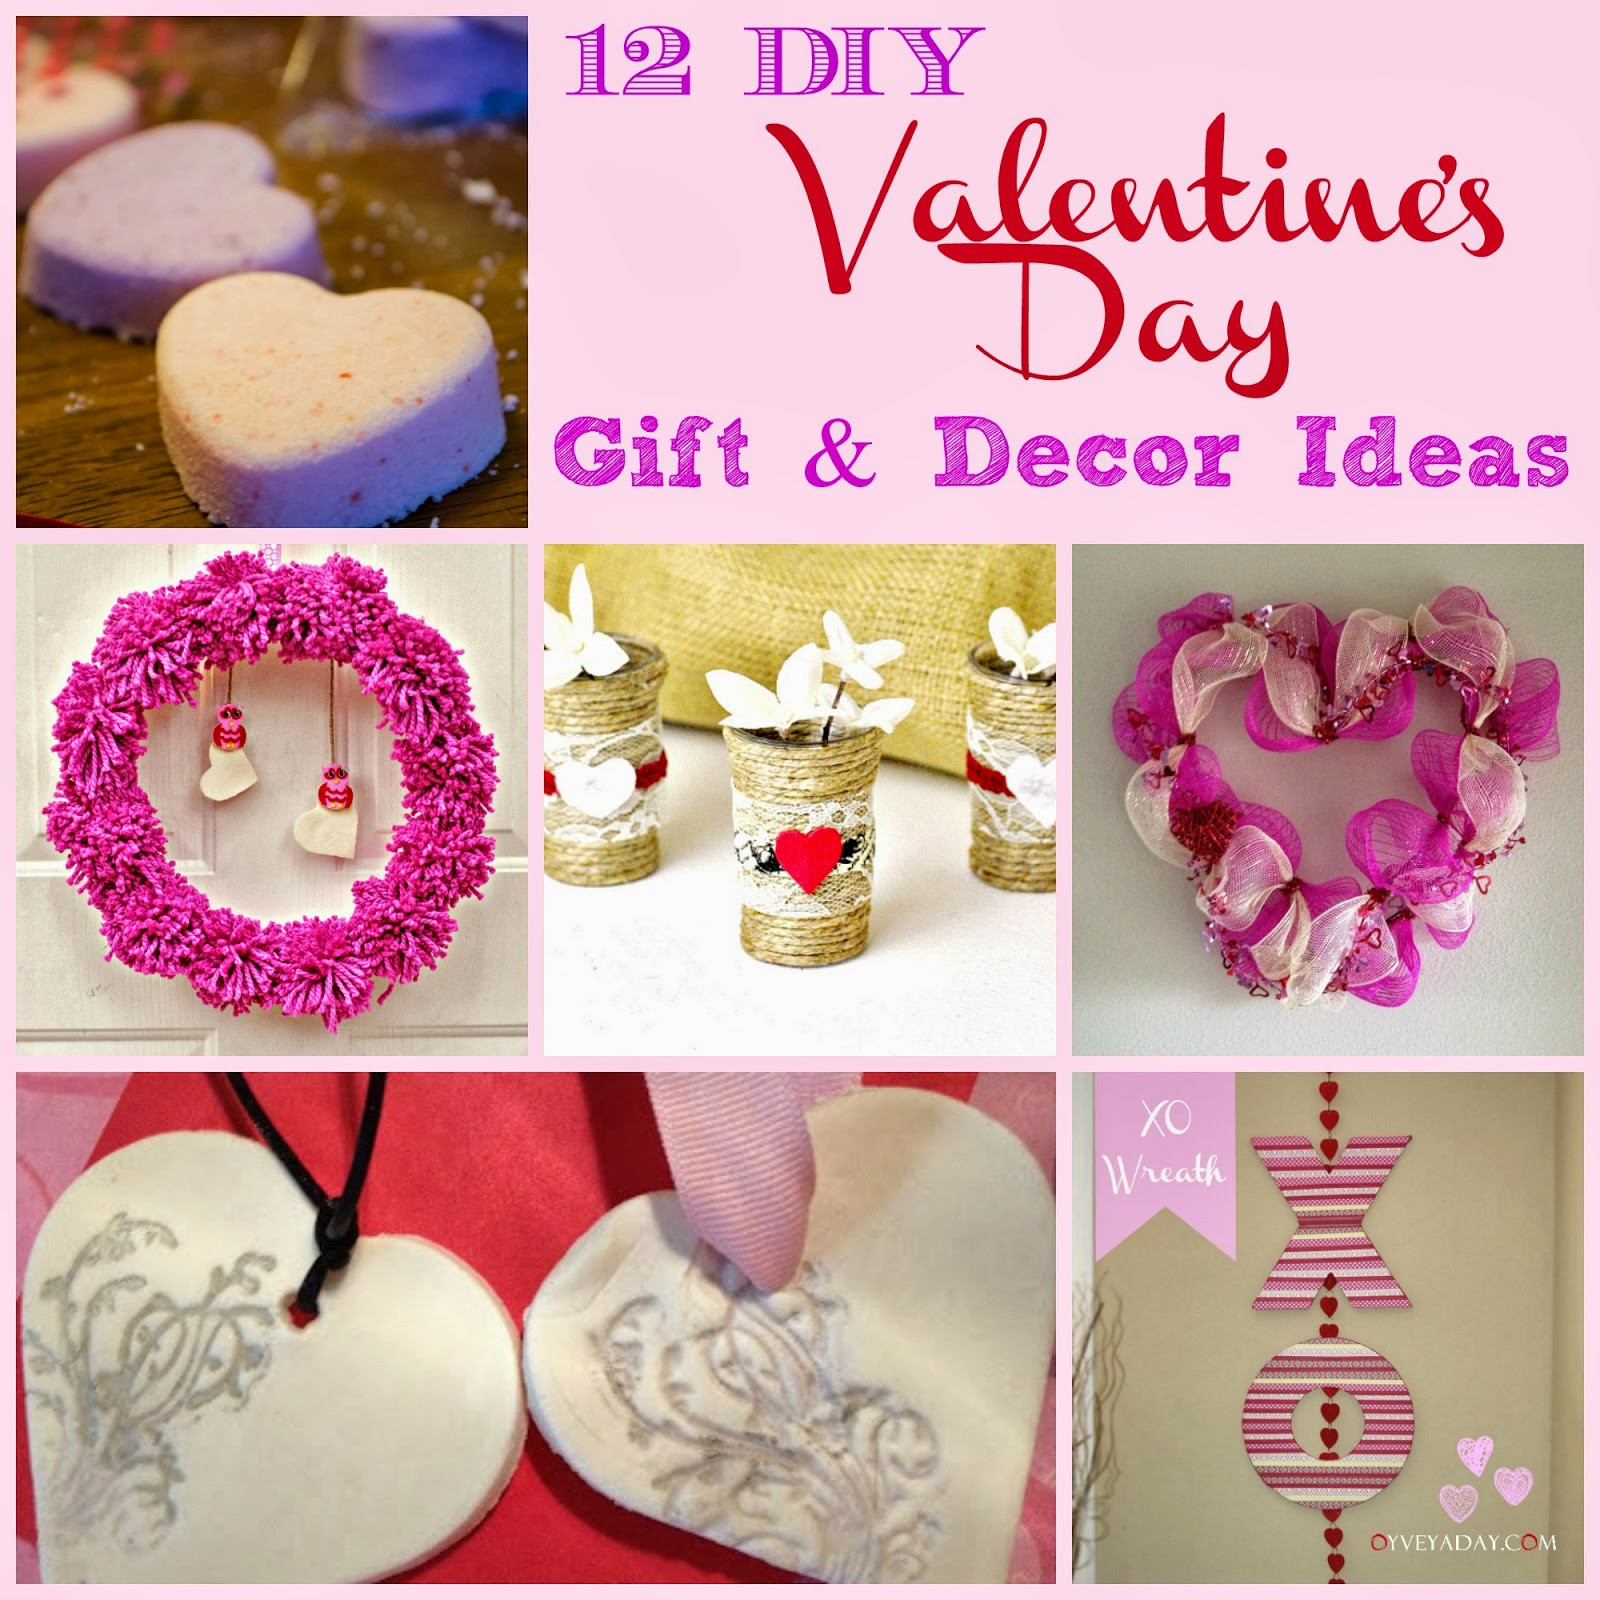 Valentines Day Presents Ideas
 12 DIY Valentine s Day Gift & Decor Ideas Outnumbered 3 to 1